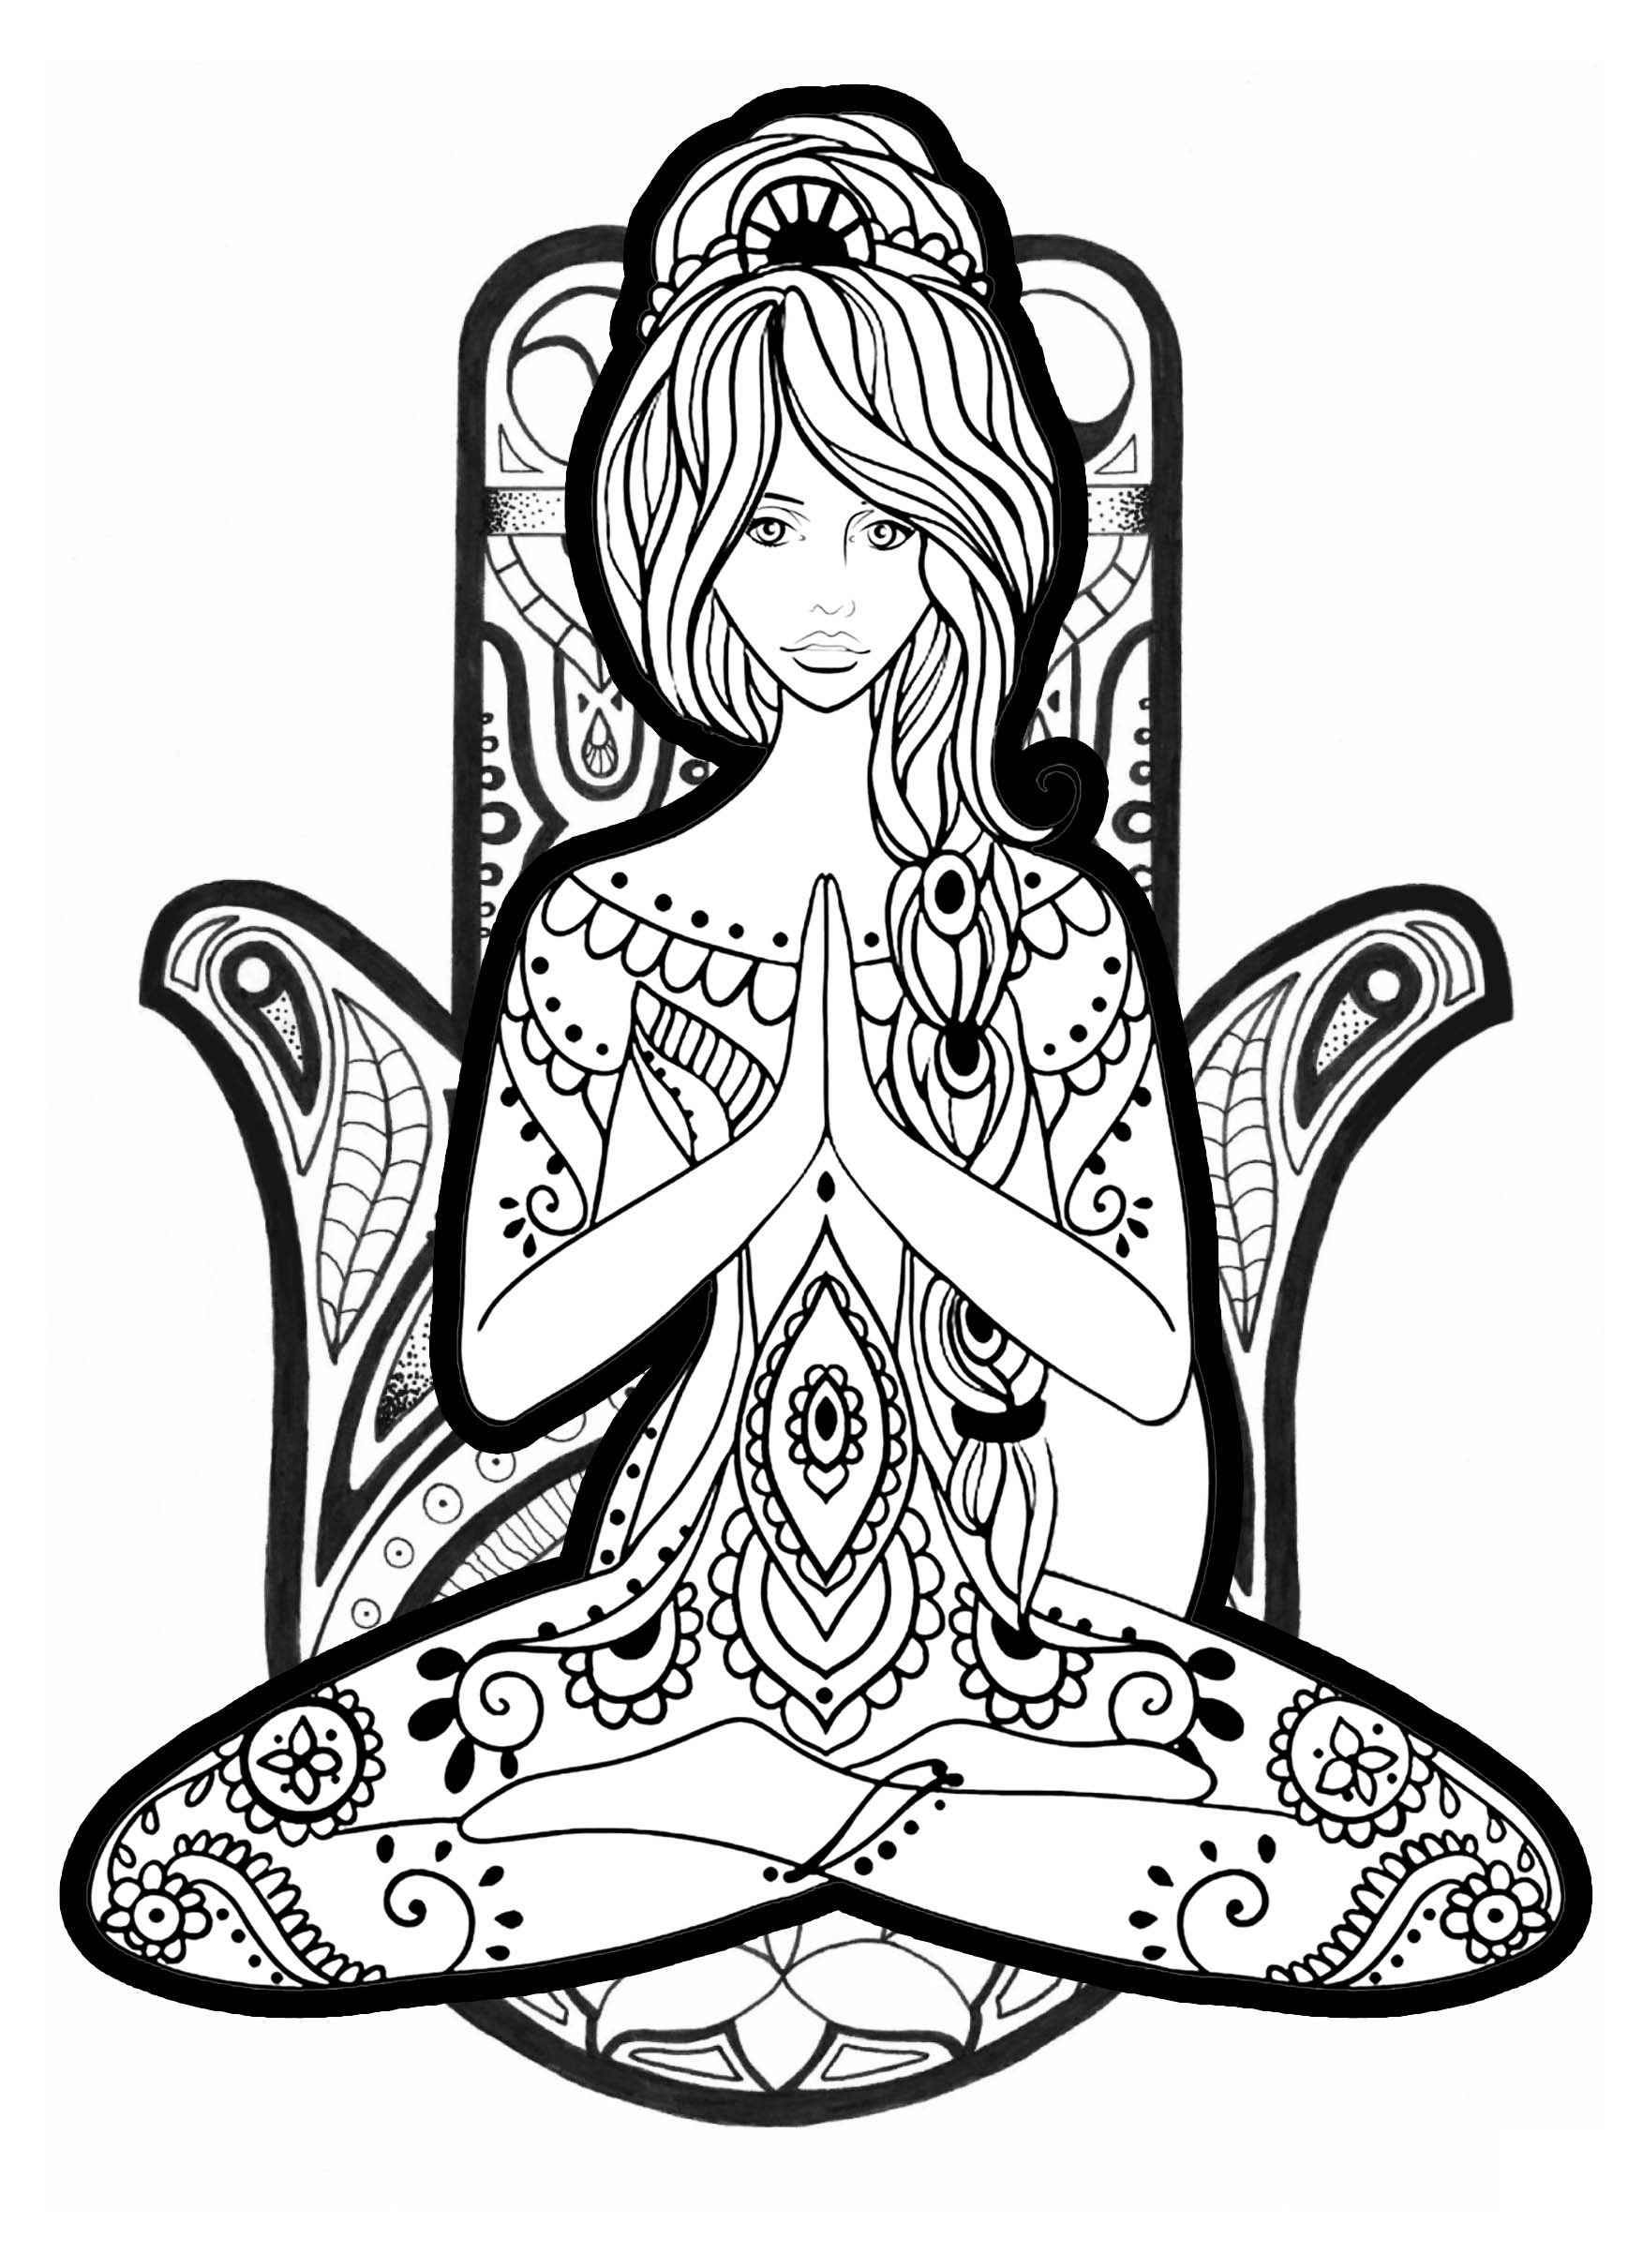 Yoga Coloring page (difficult)